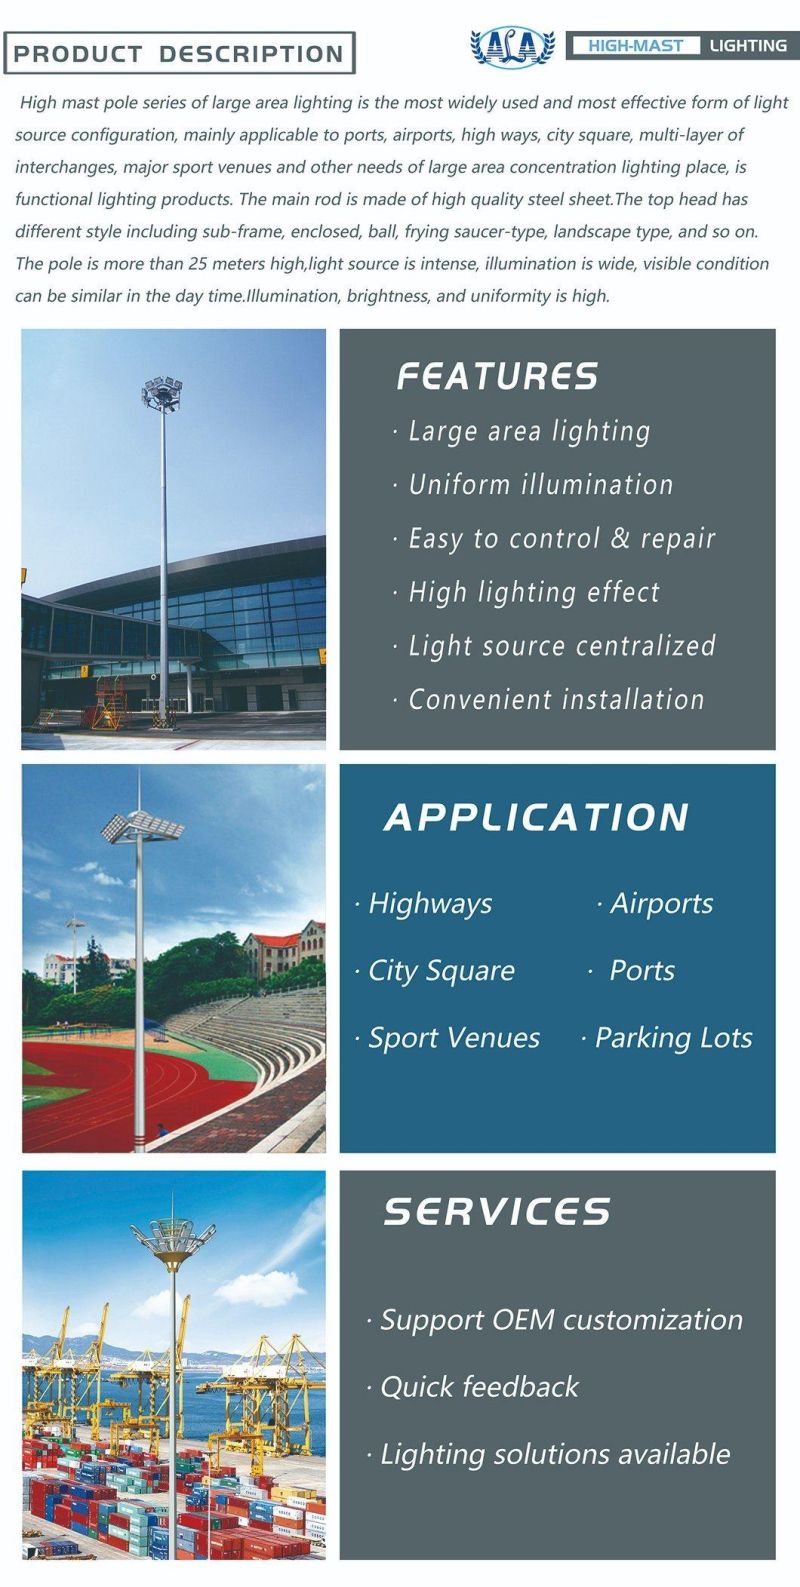 Ala Hot Sale Steel Round 400W High Mast Light with Pole Light for Outdoor Lighting 15m 20m 25m 30m